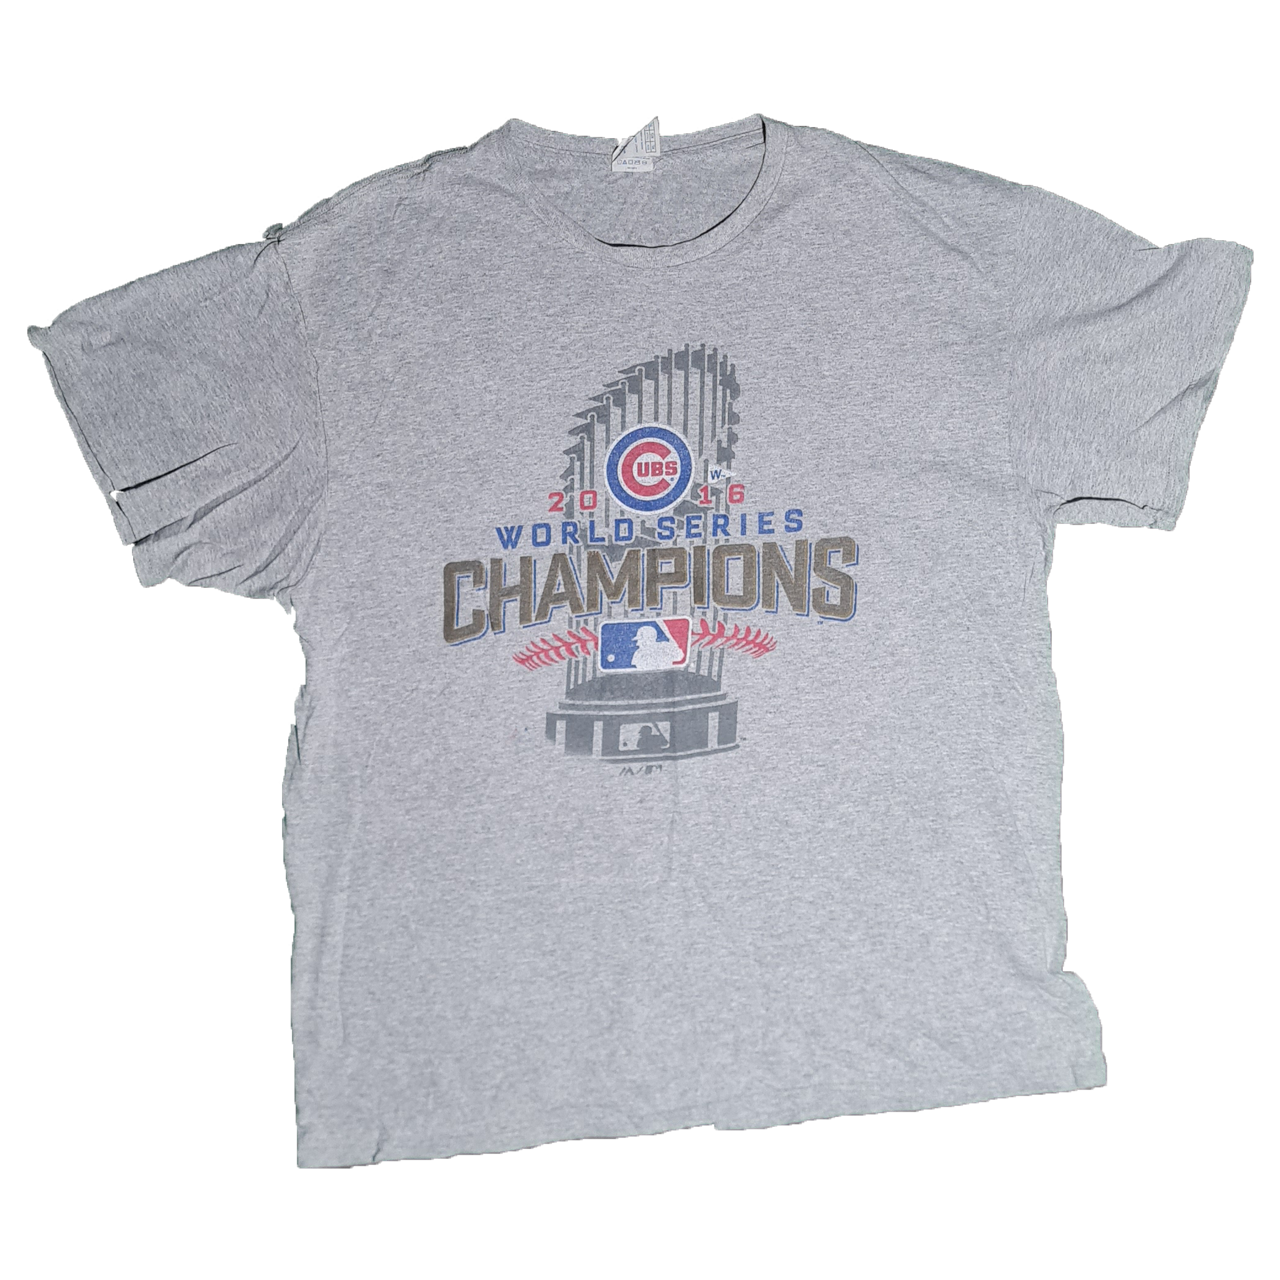 Chicago Cubs 2016 World Series Champions 9th Inning Long Sleeve T